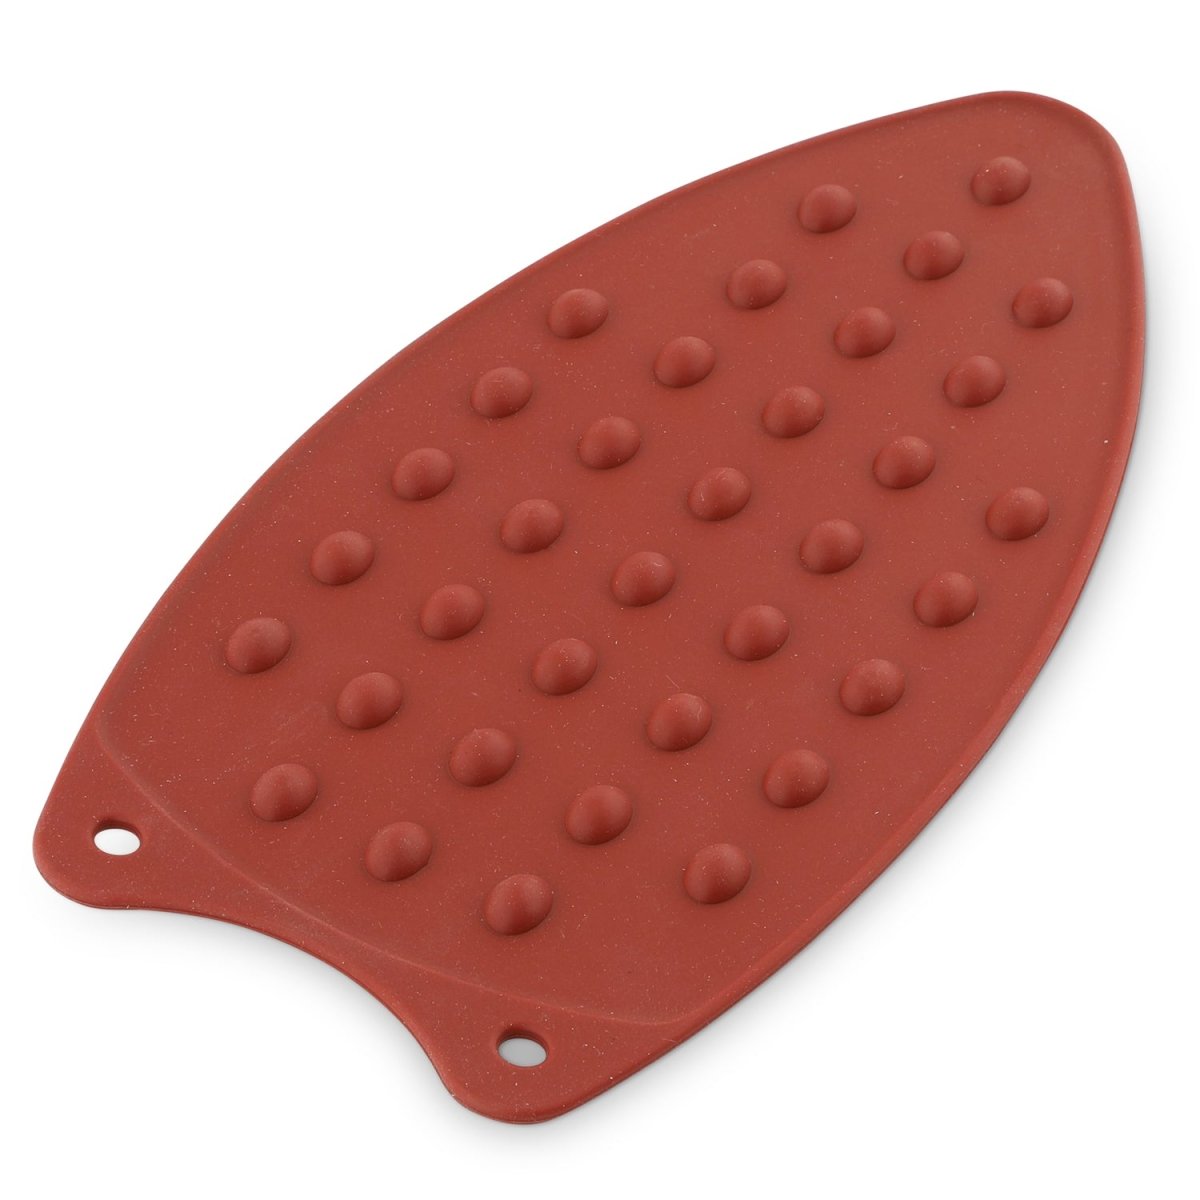 Silicone Ironing Pad, Anti-Slip Ironing Board Cover Heat Resistant Iron  Holder for Ironing Rest(Red)